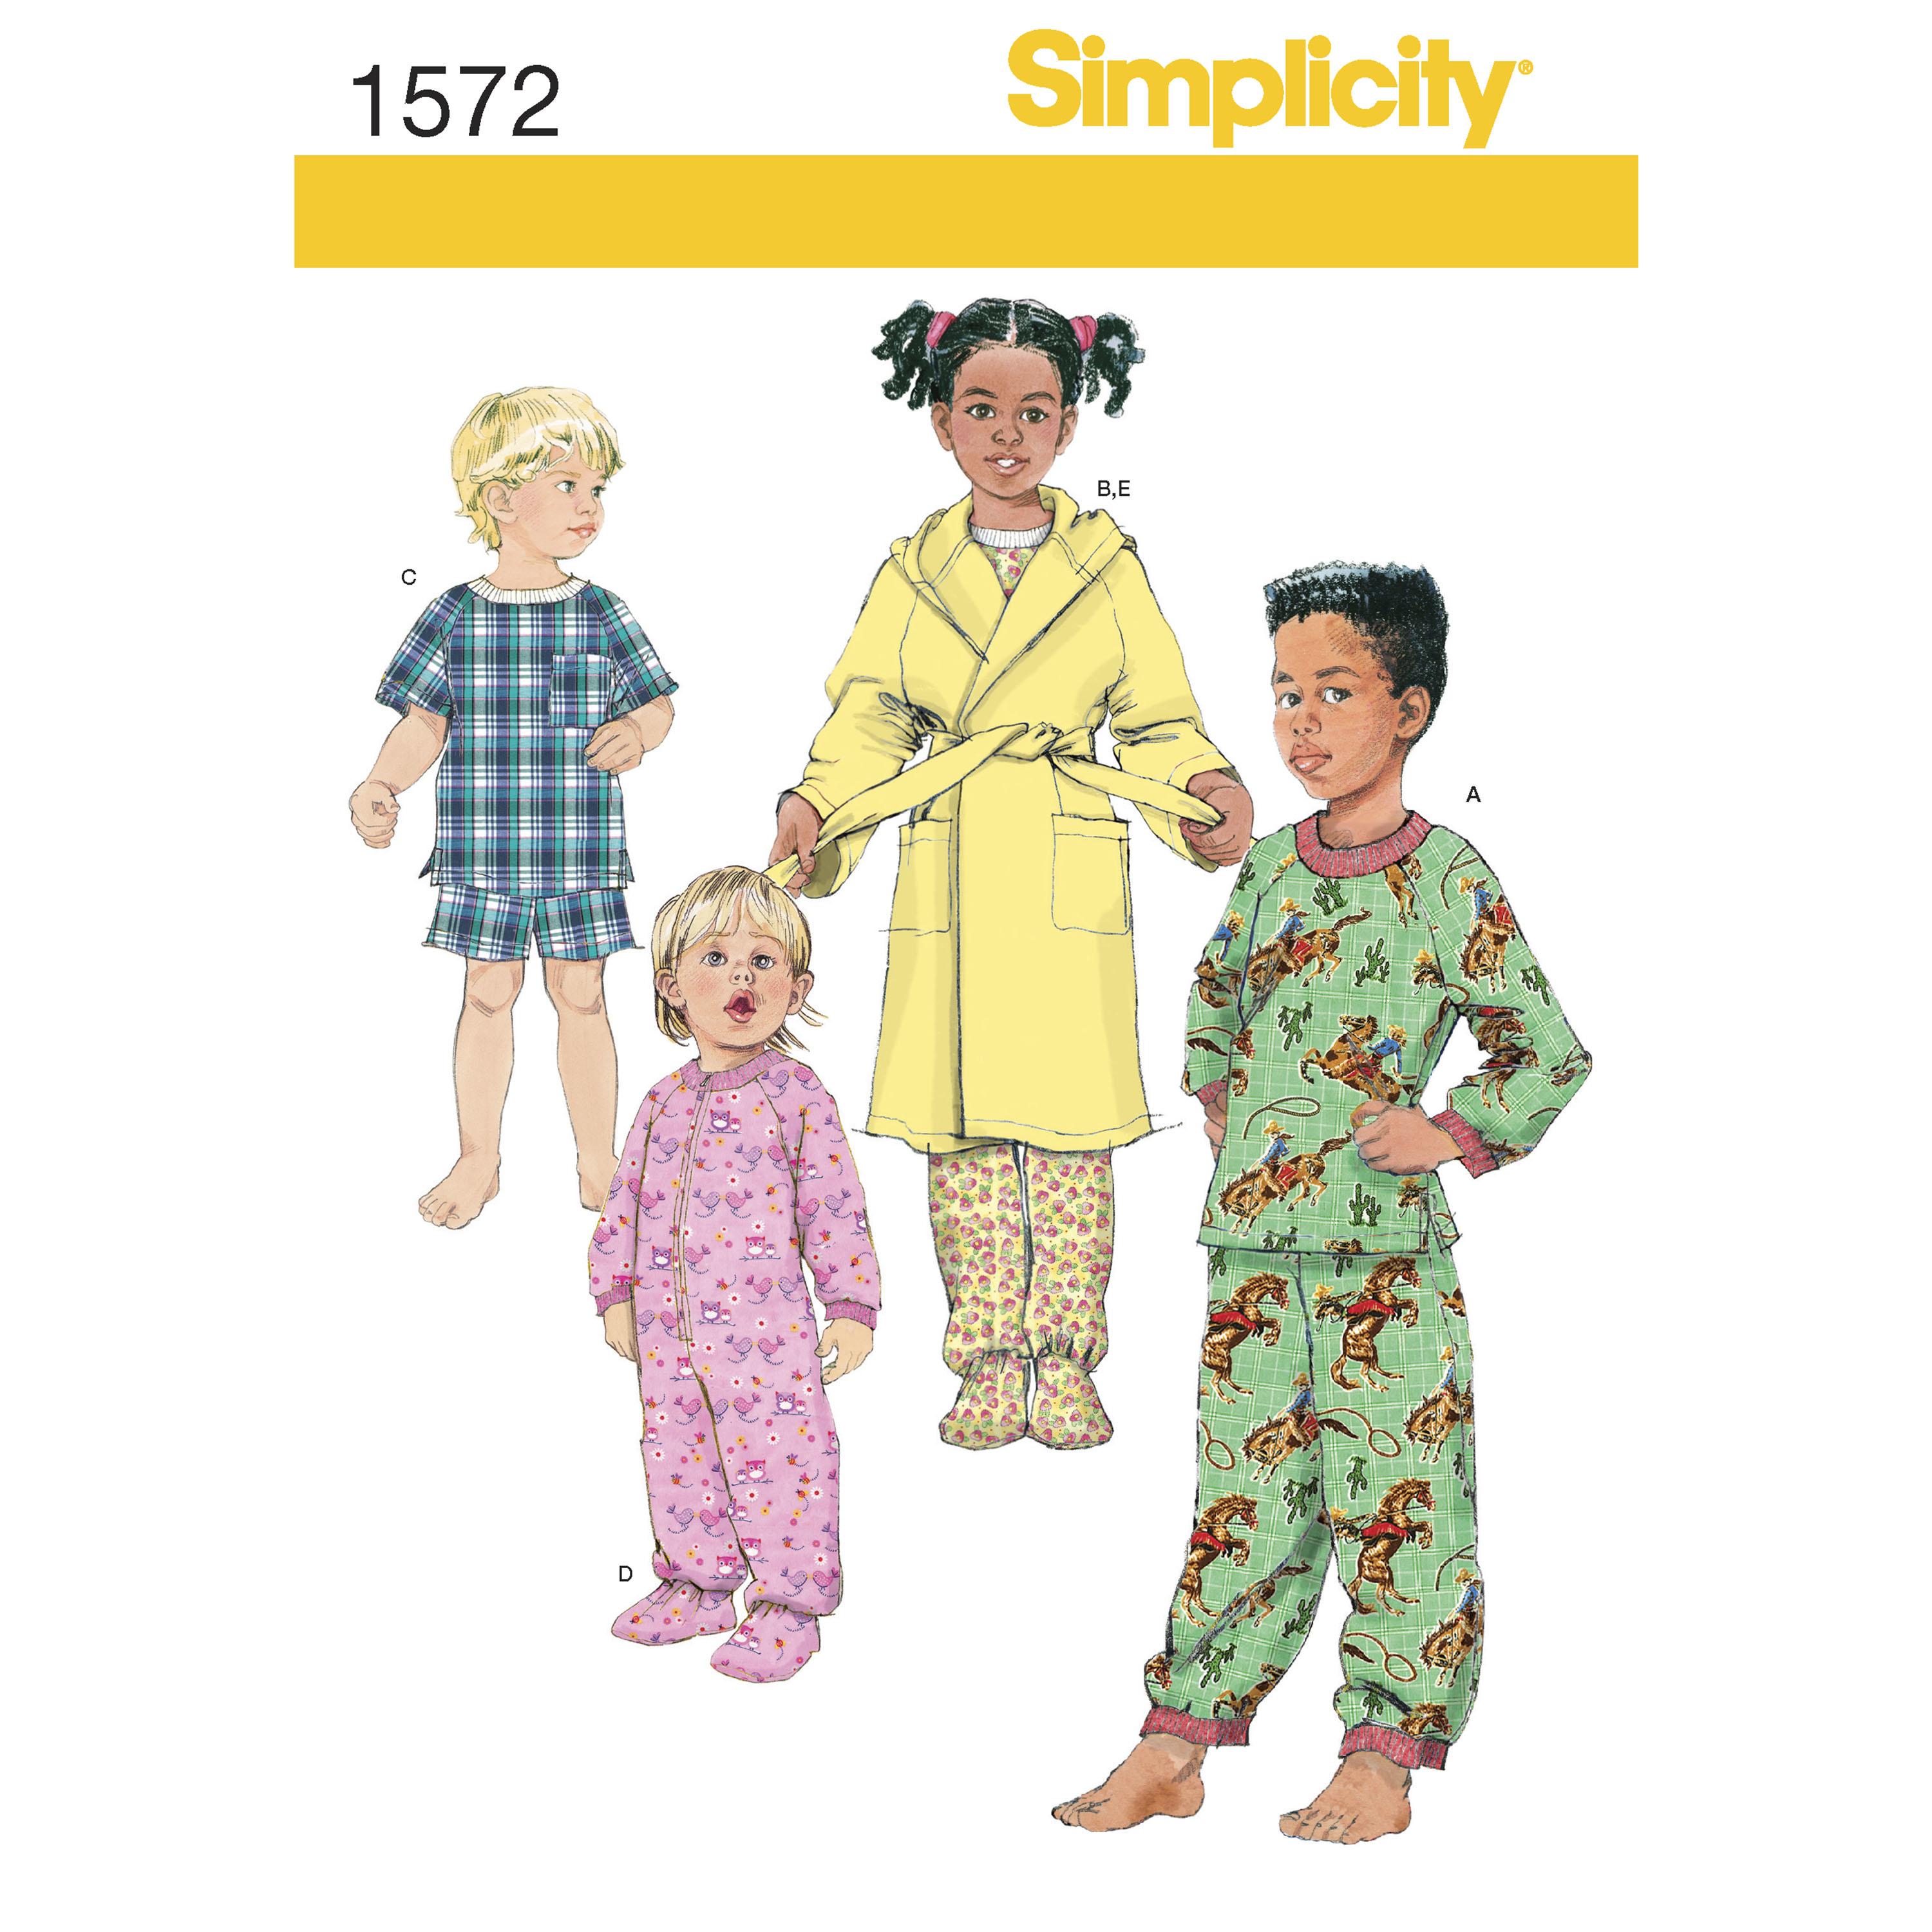 Simplicity S1572 Toddlers' and Child's Sleepwear and Robe